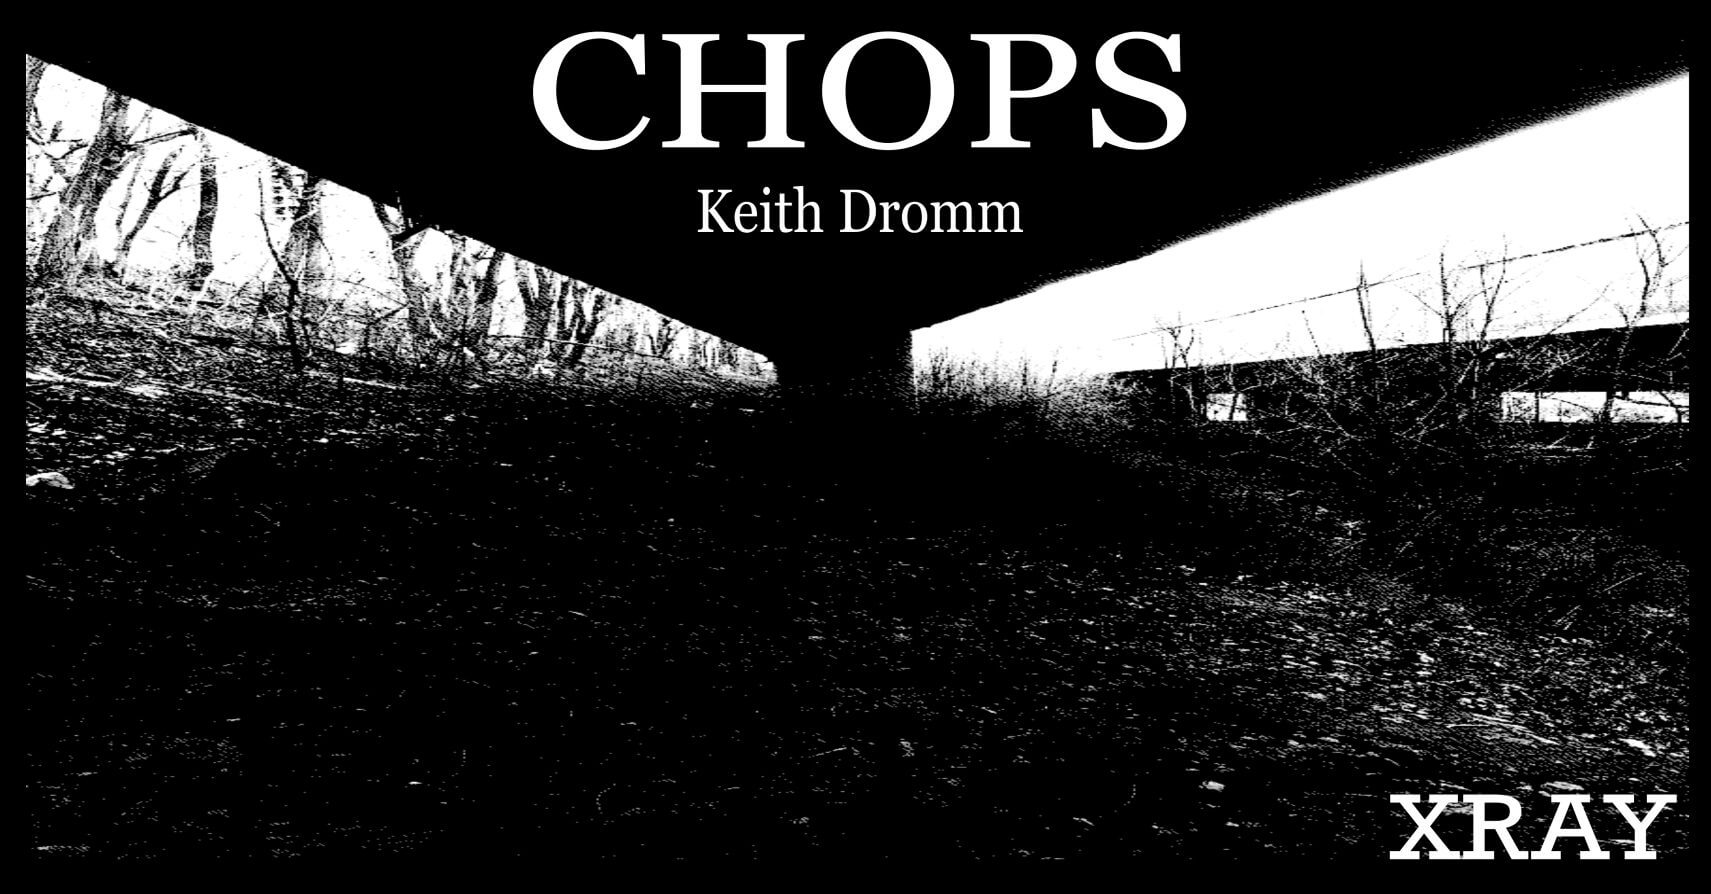 CHOPS by Keith Dromm